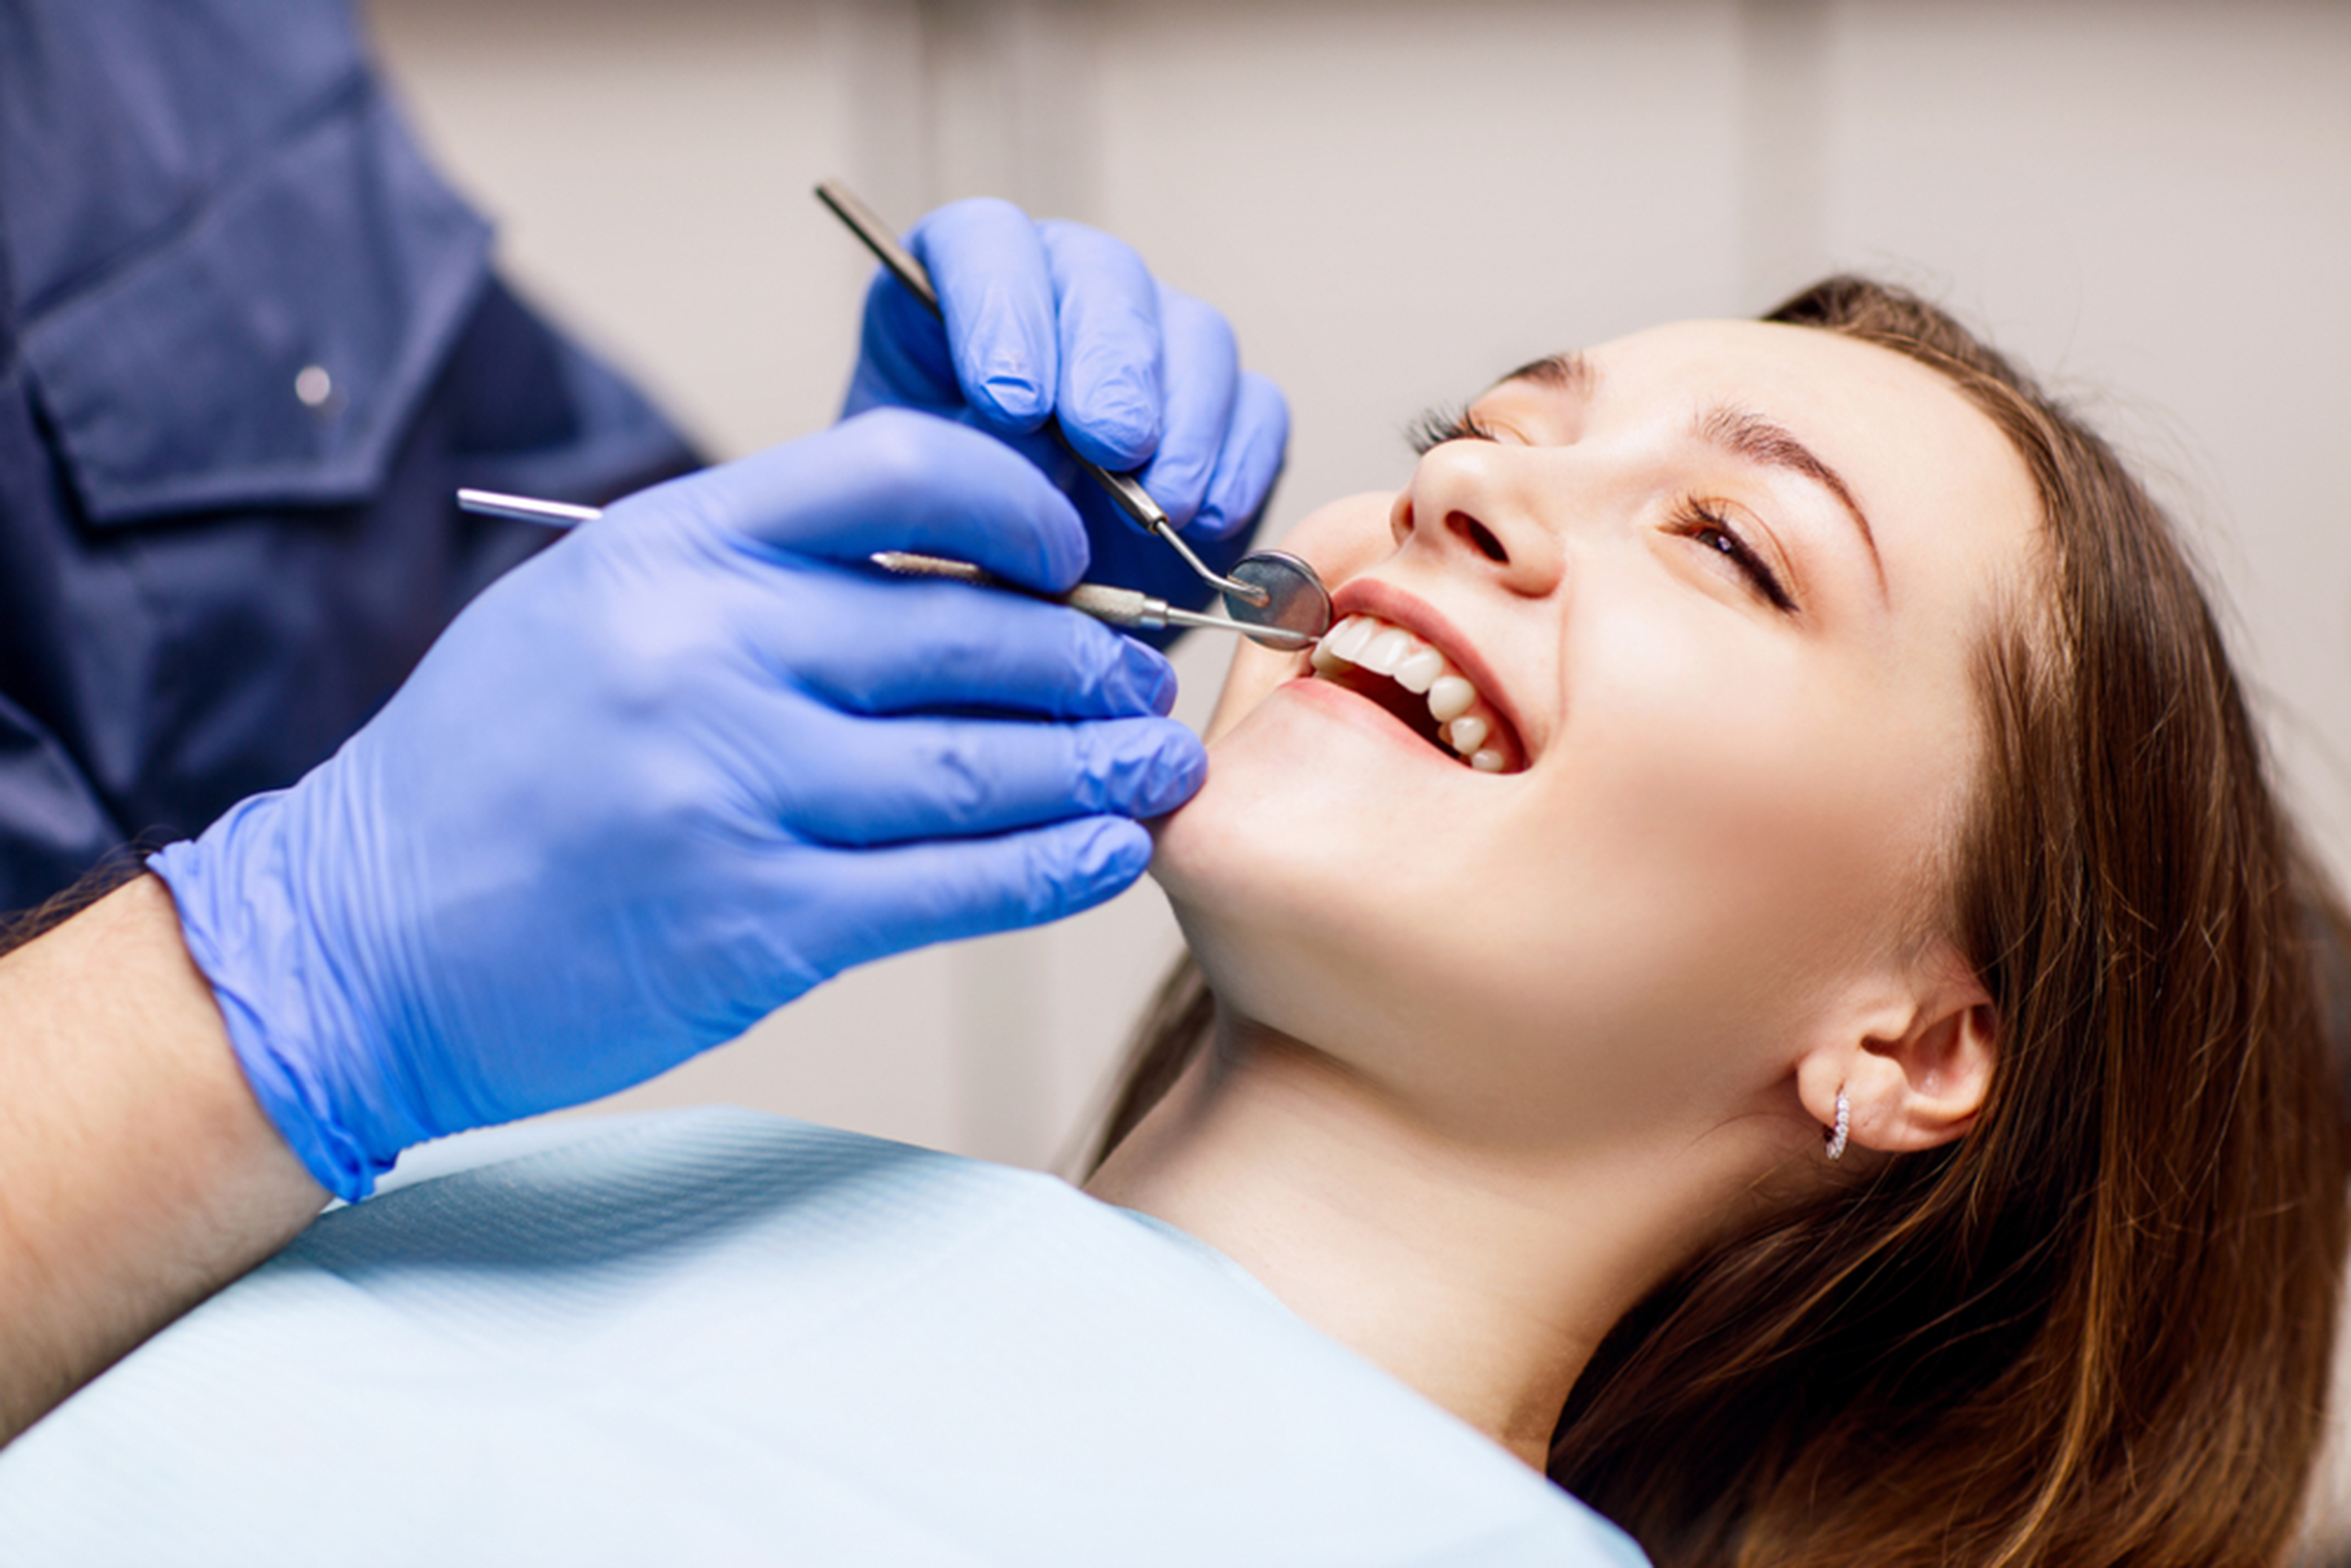 what can occur if you don't get regular dental cleanings